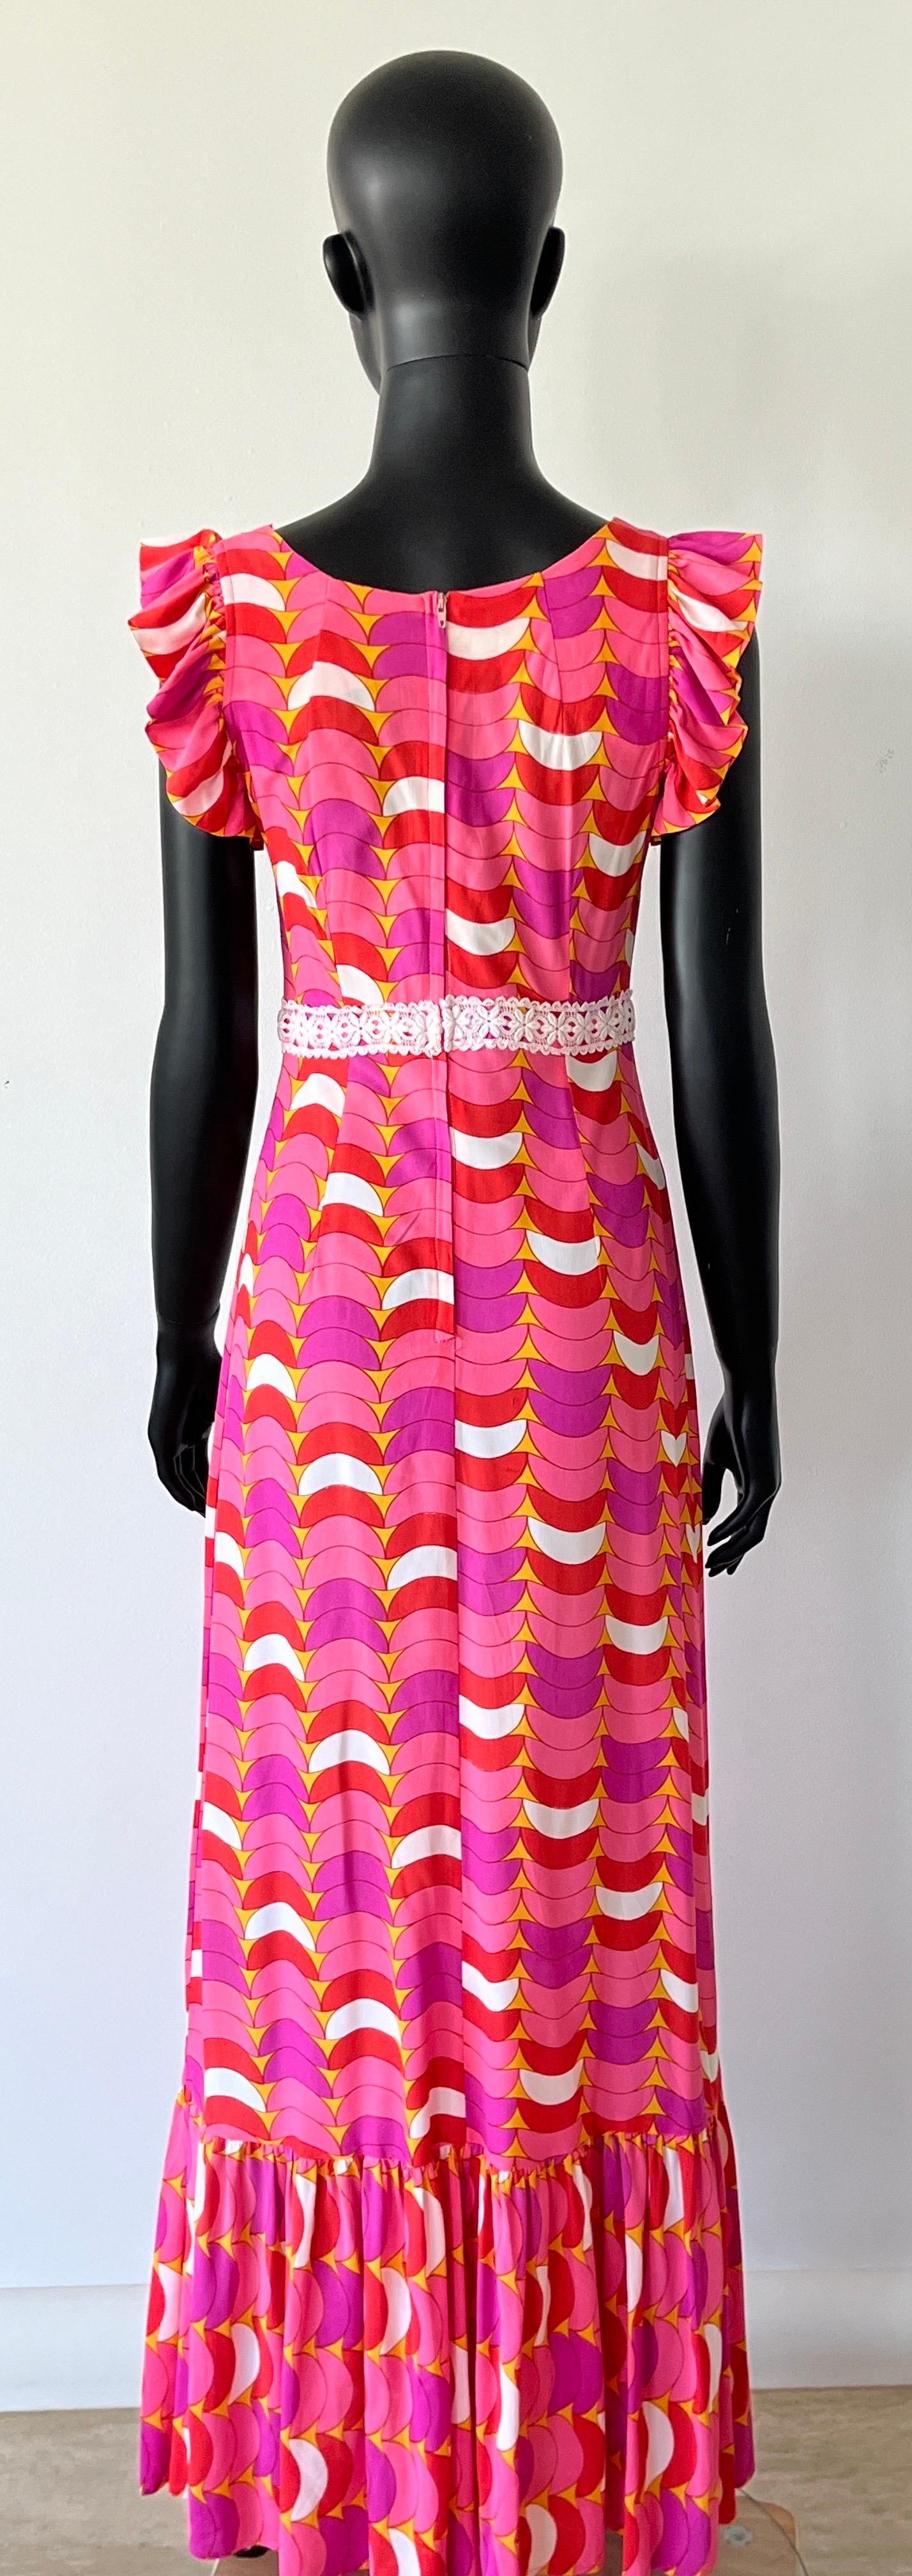 A spectacular vintage 1970’s patterned long evening dress with lace detail and f 5